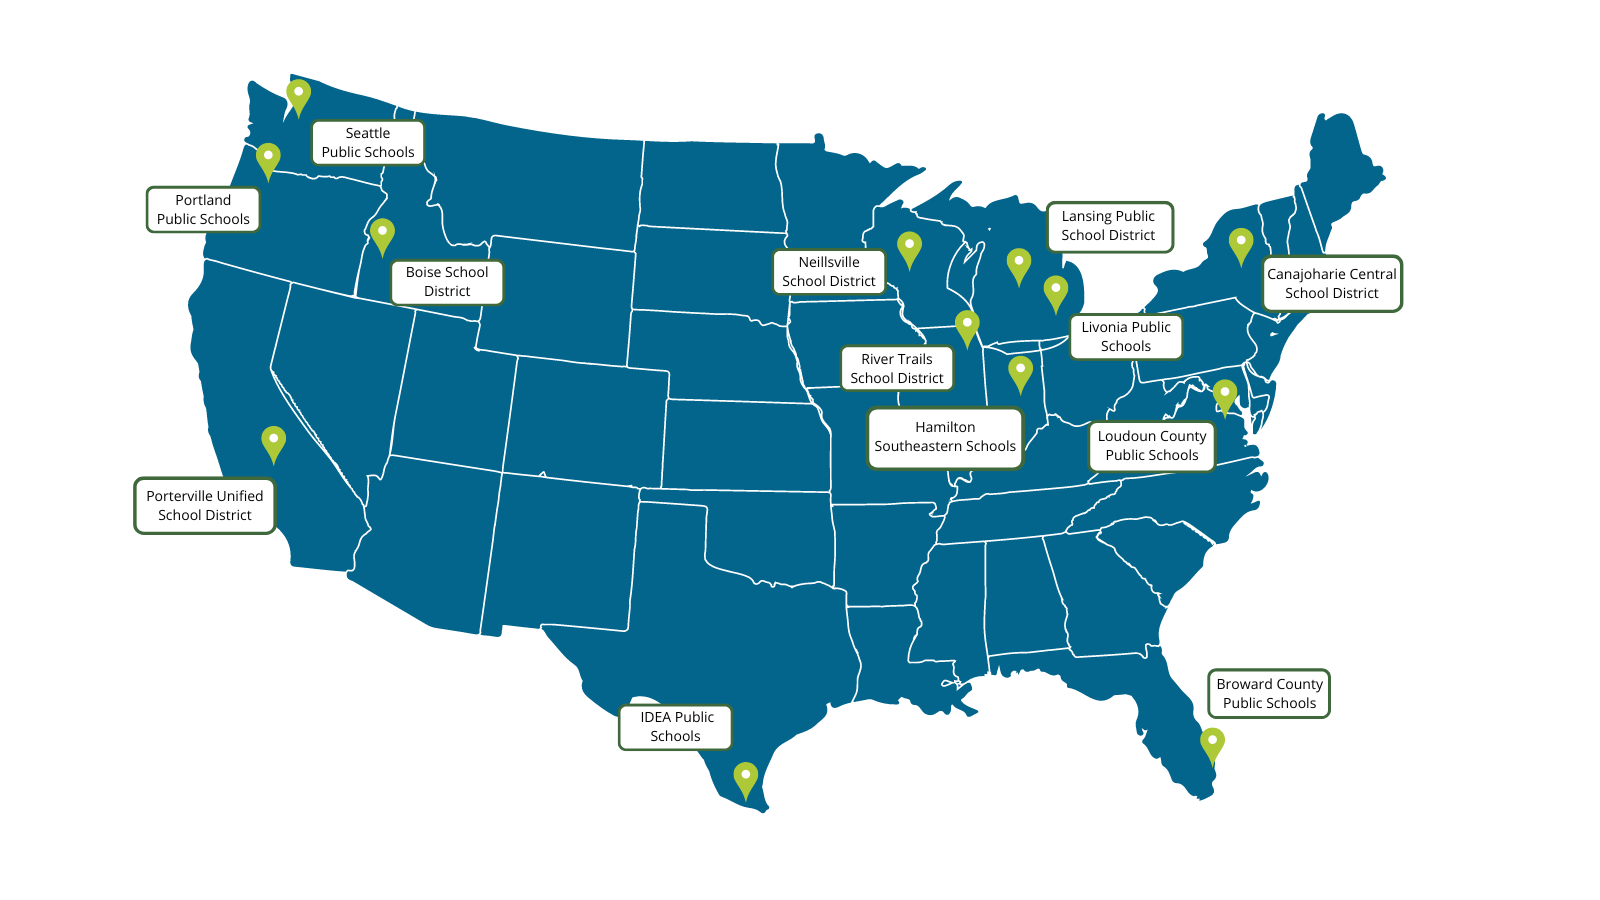 Map of where awardees are located - all over the U.S.